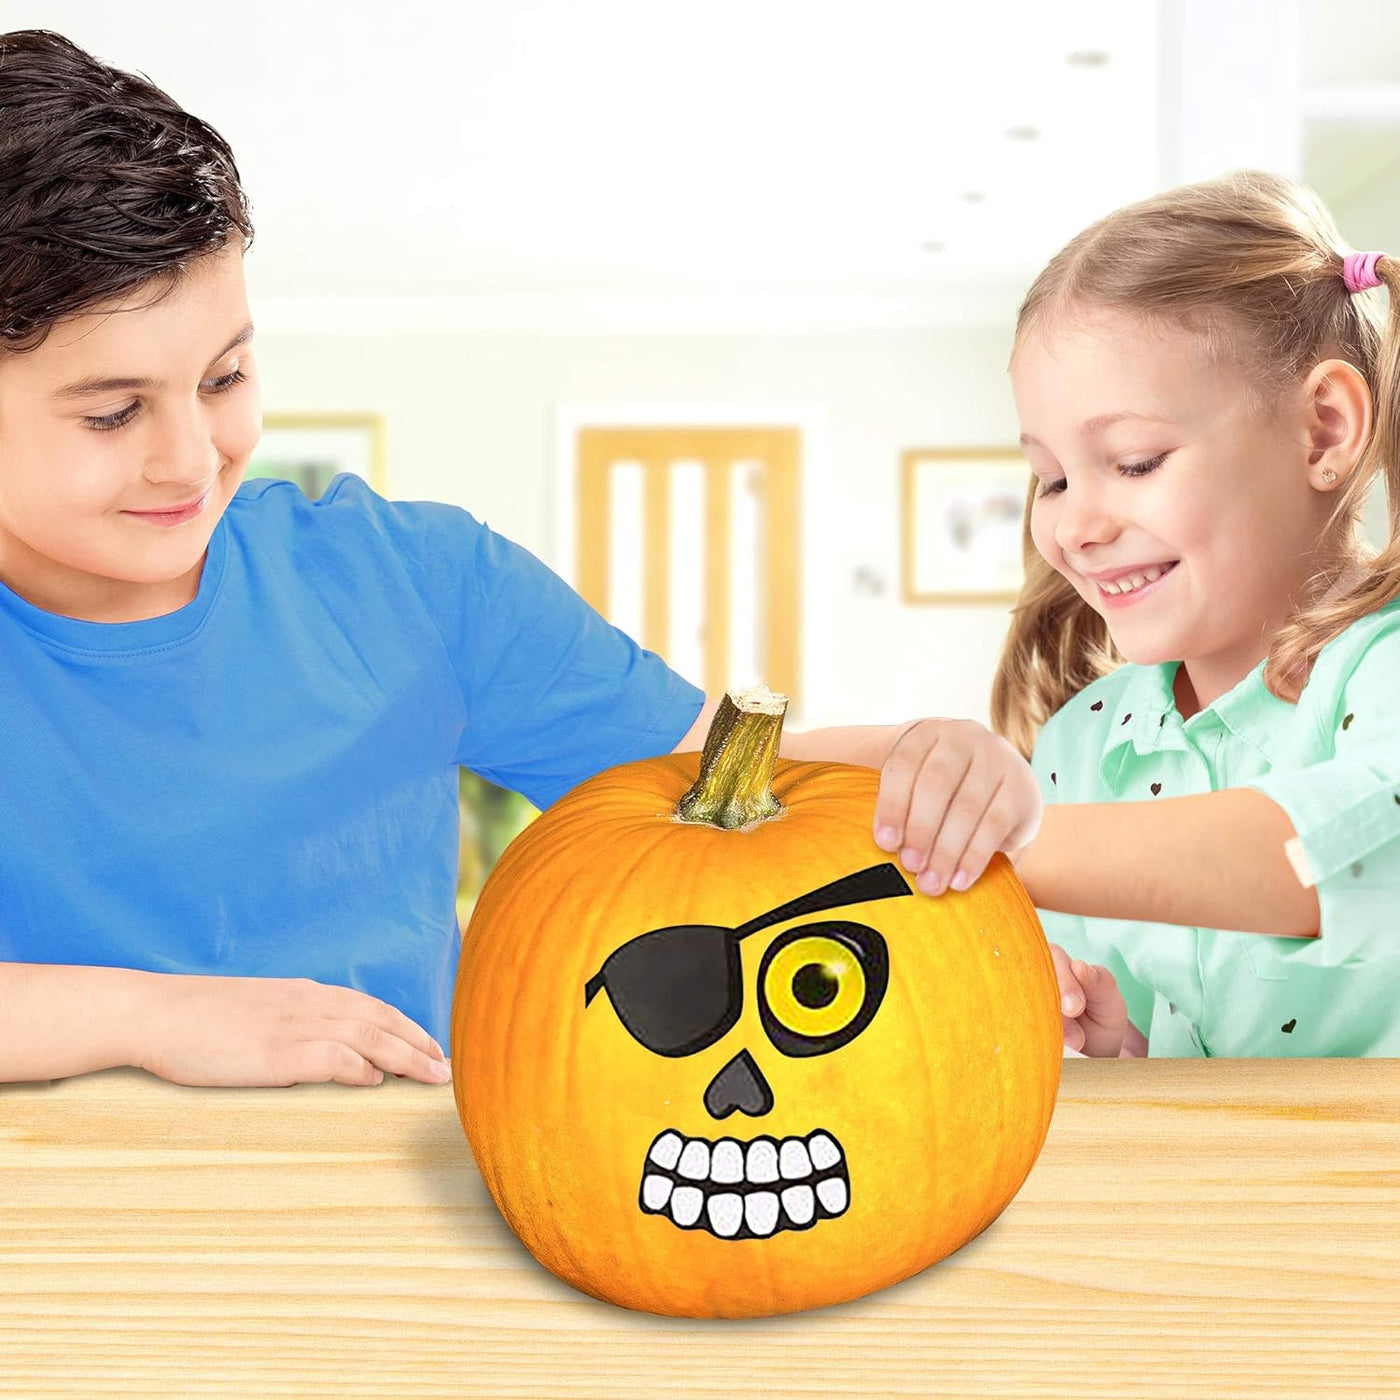 ArtCreativity Halloween Pumpkin Decorating Stickers - 24 Large Sheets - Jack-o-Lantern Decoration Kit - 52 Total Face Stickers - Cute Halloween Decor Idea - Treats, Gifts, and Crafts for Kids- 6" x 9"